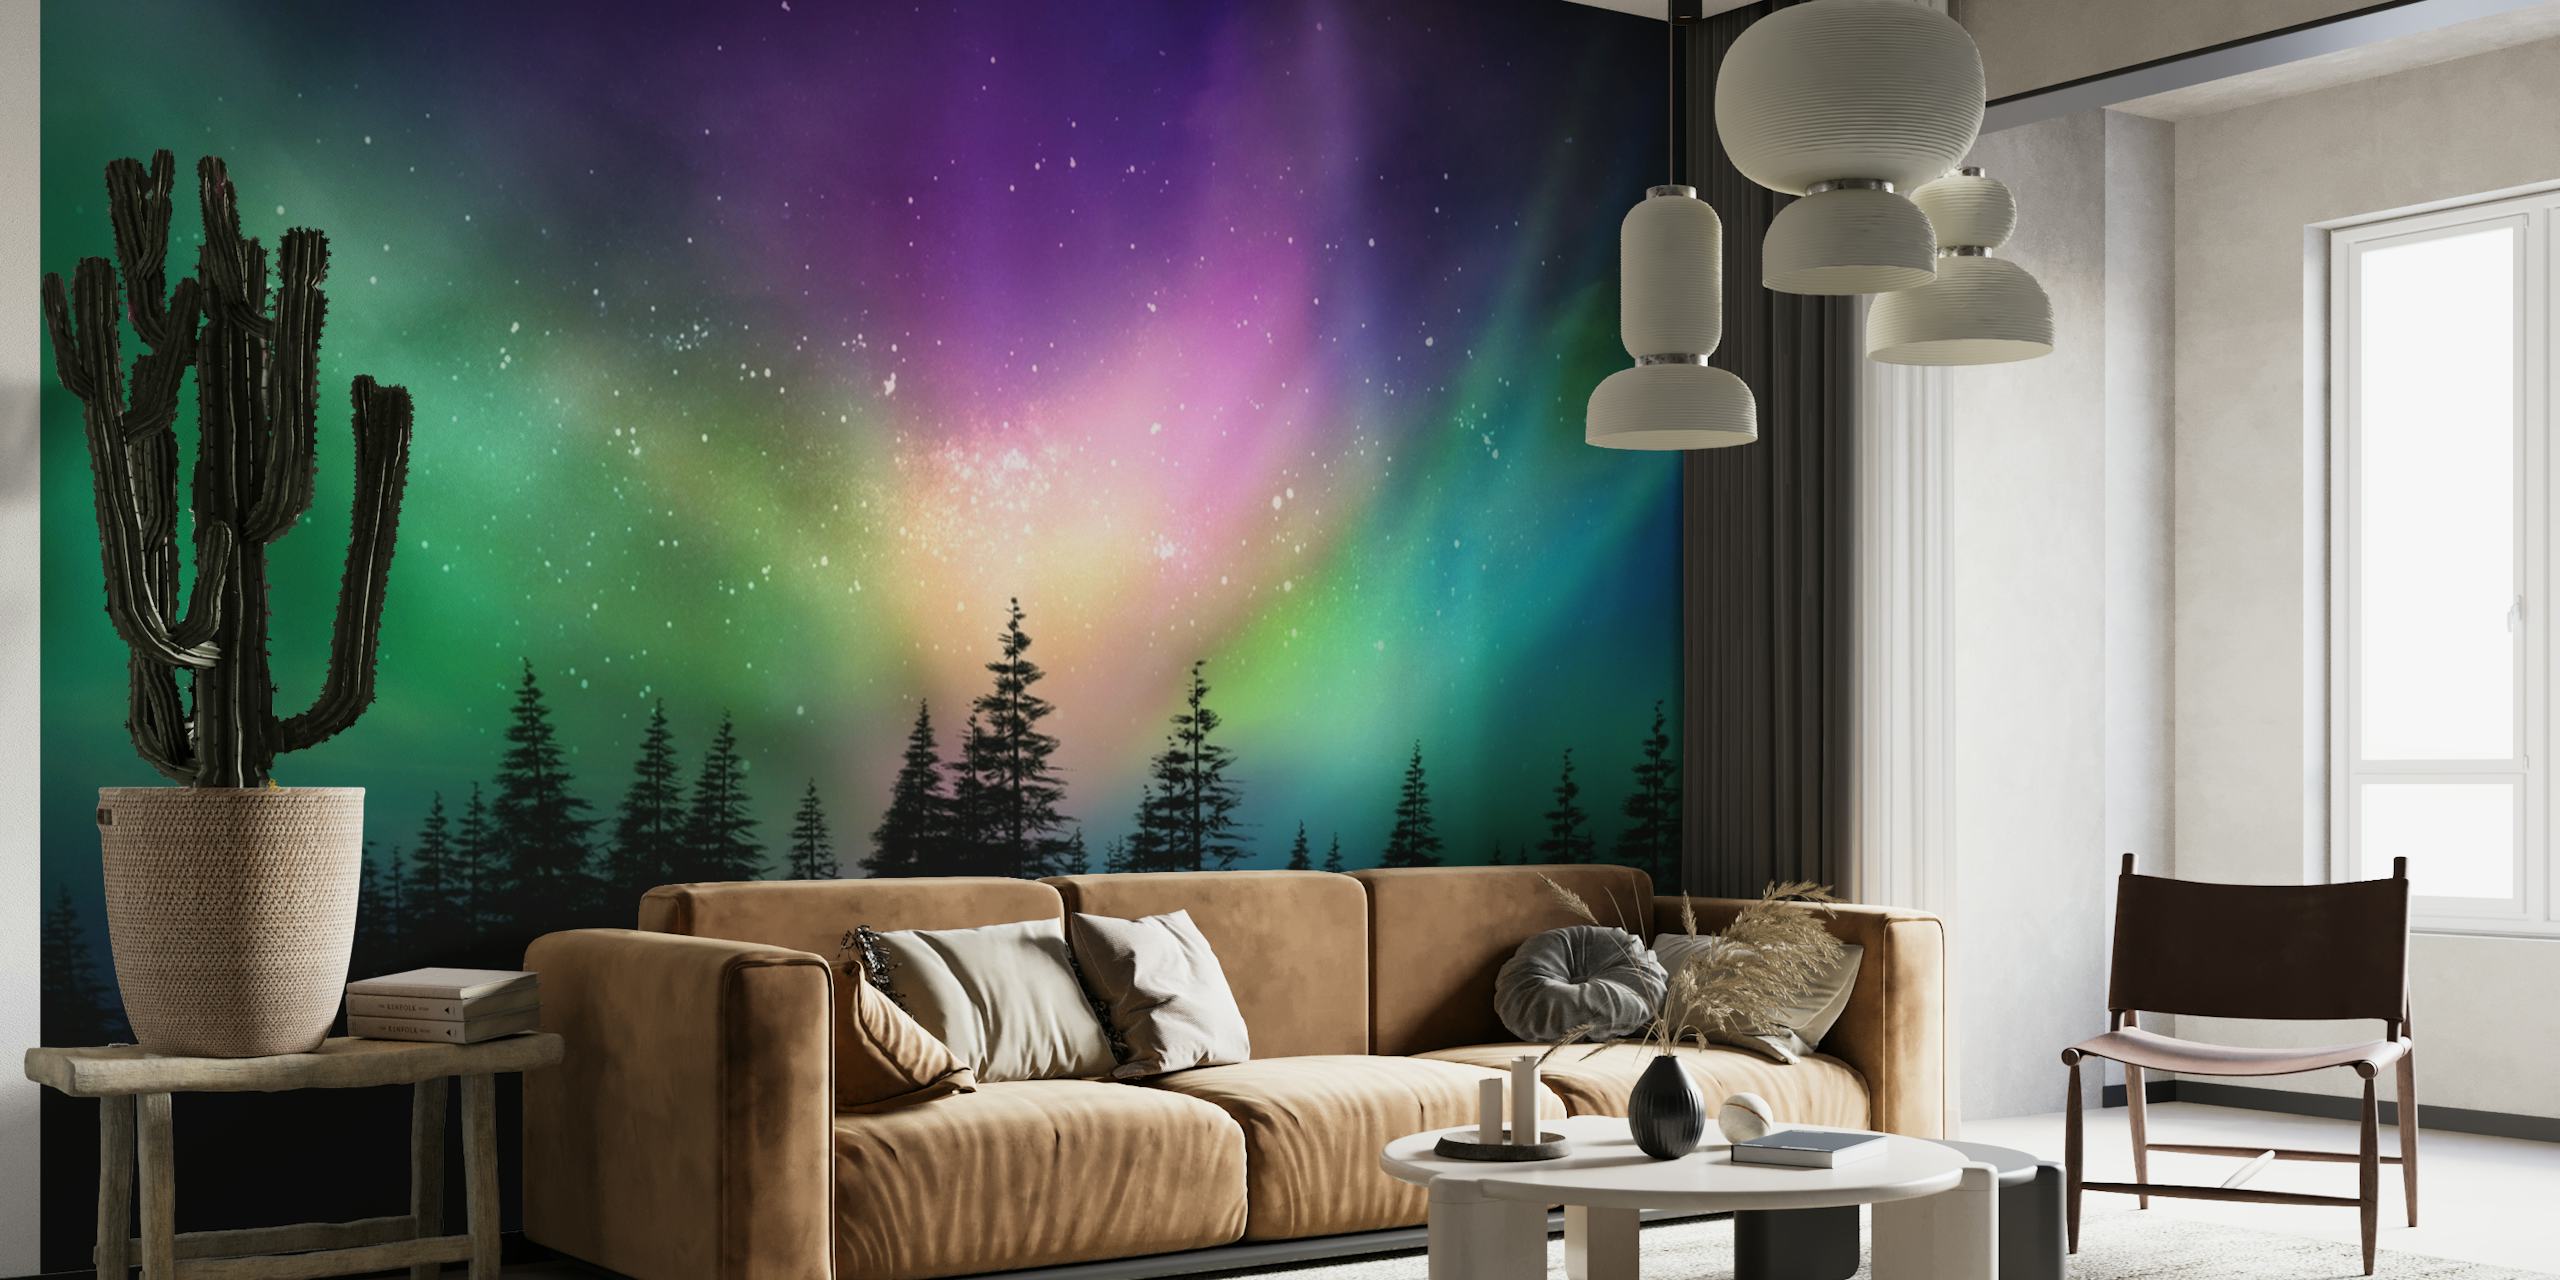 Colorful northern lights wall mural with a forest silhouette